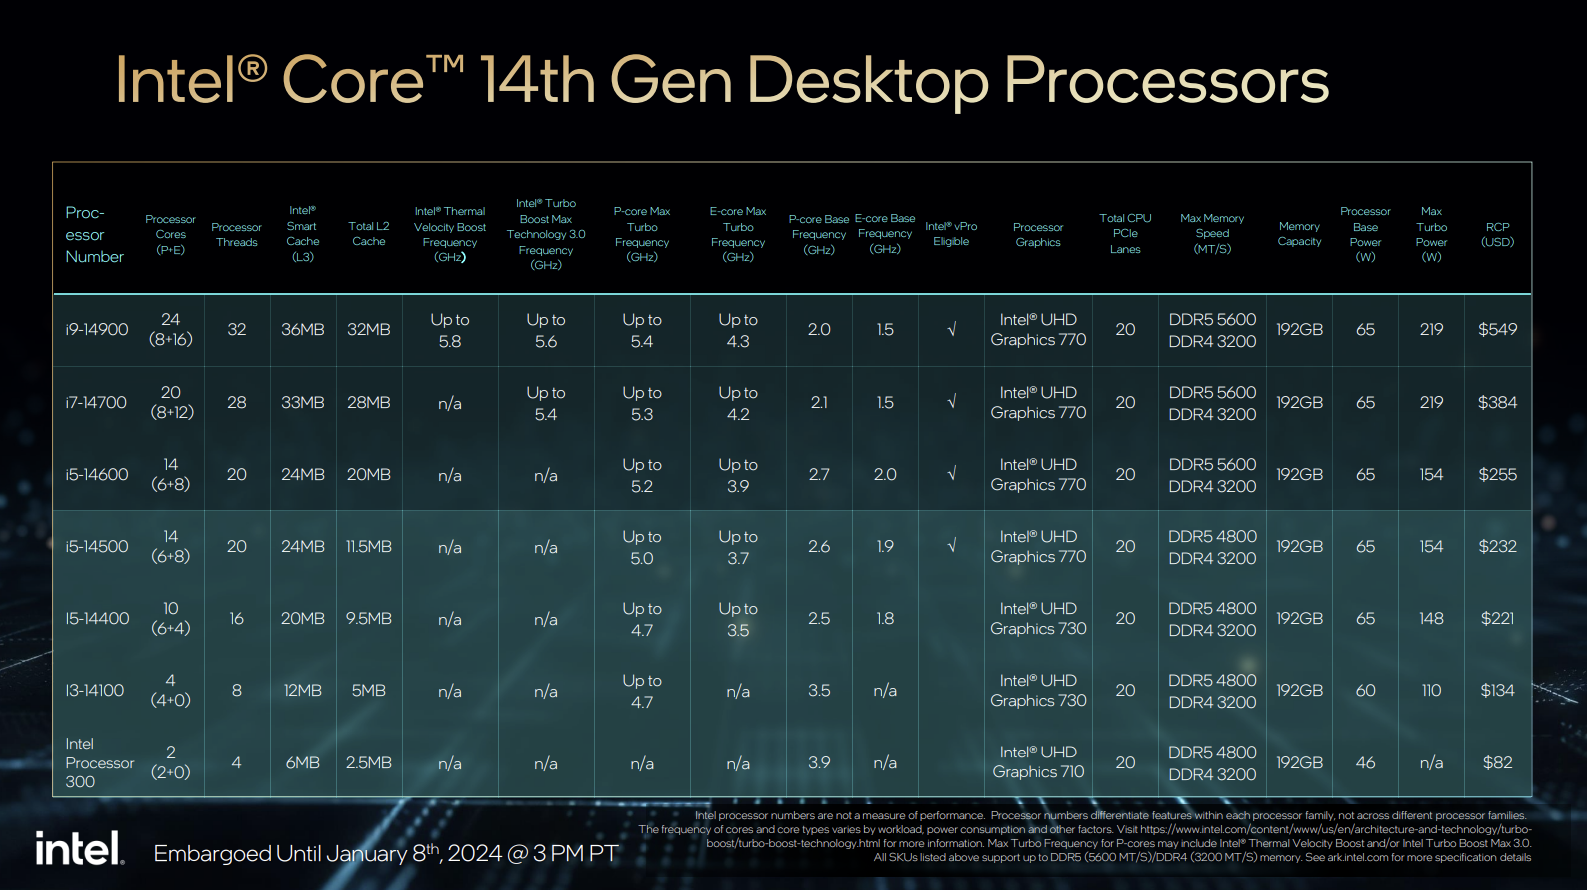 Intel announced desktop and mobile processors of the 14th generation